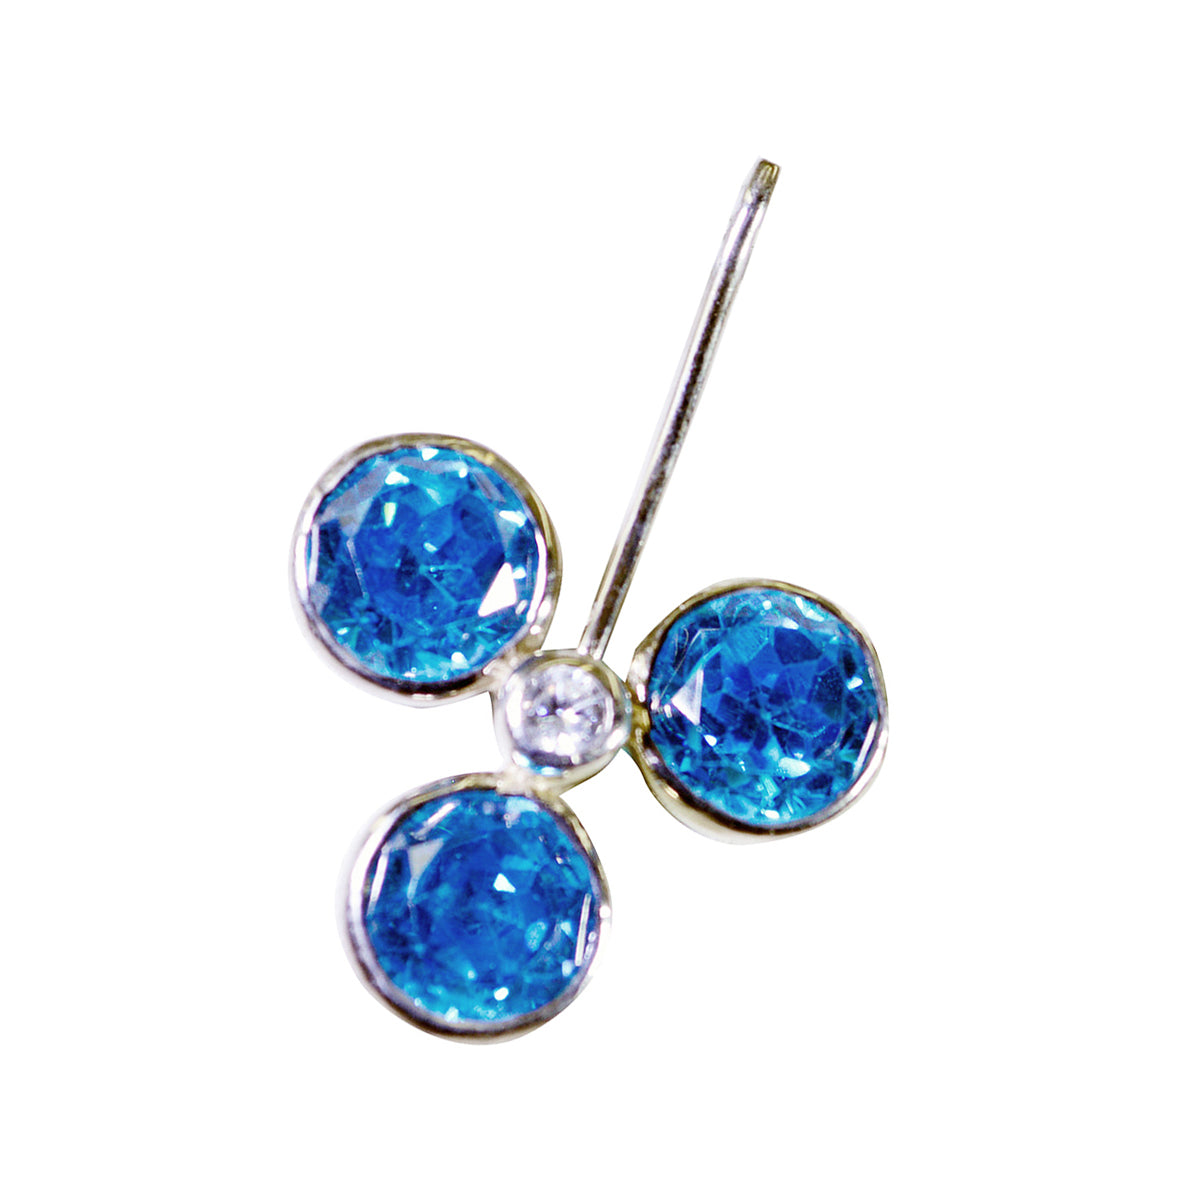 Riyo Appealing Gemstone Round Faceted Blue Blue Topaz 1034 Sterling Silver Pendant Gift For Good Friday